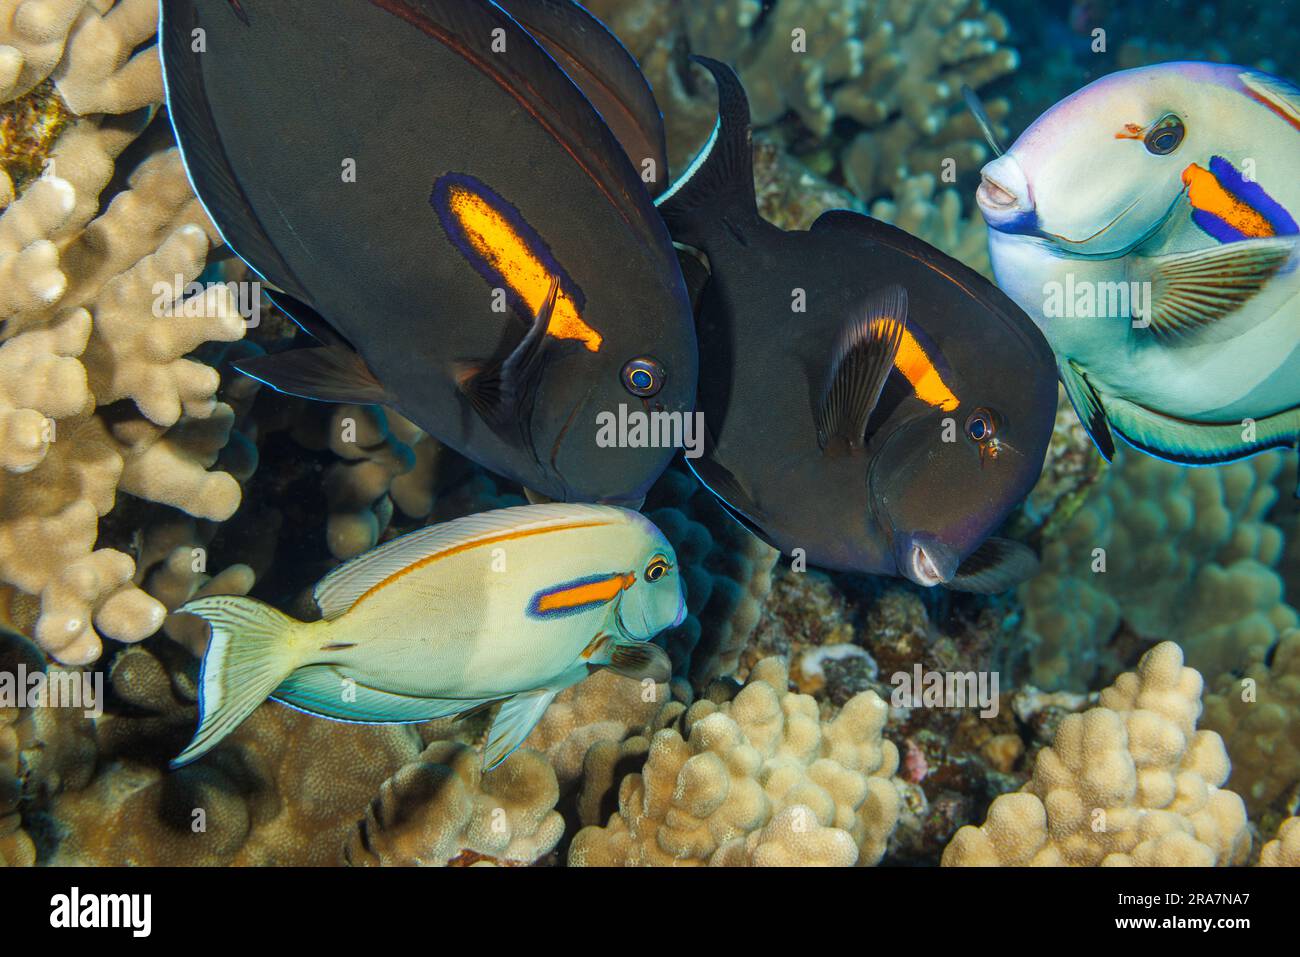 These orangeband surgeonfish, Acanthurus olivaceus, are visiting the cleaning station of an endemic Hawaiian cleaner wrasse, Labroides phthirophagus. Stock Photo